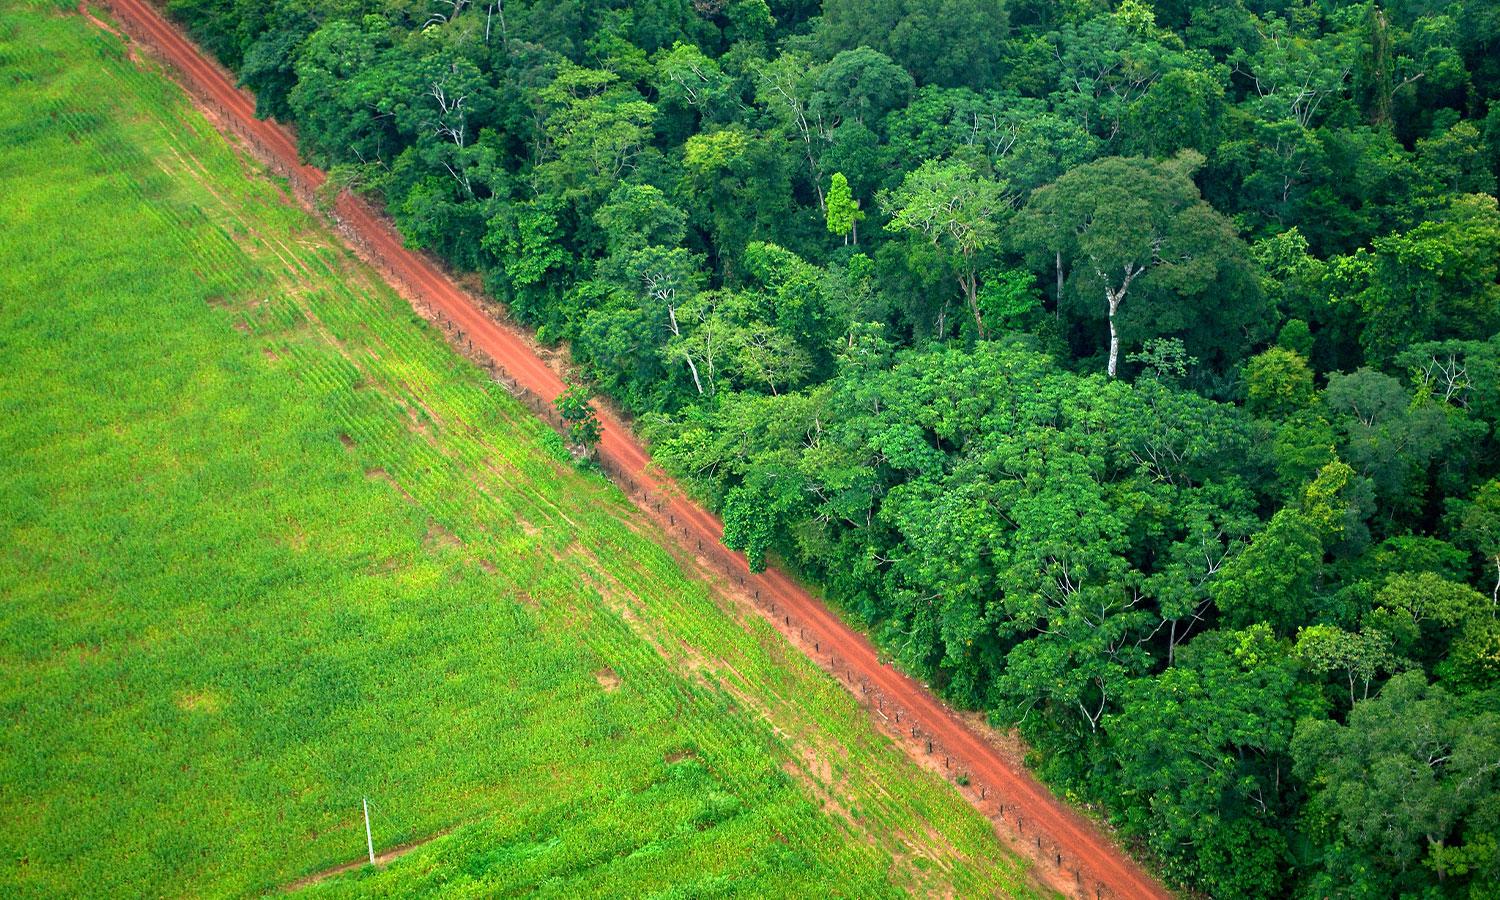 Deforestation Causes, Effects, and Solutions